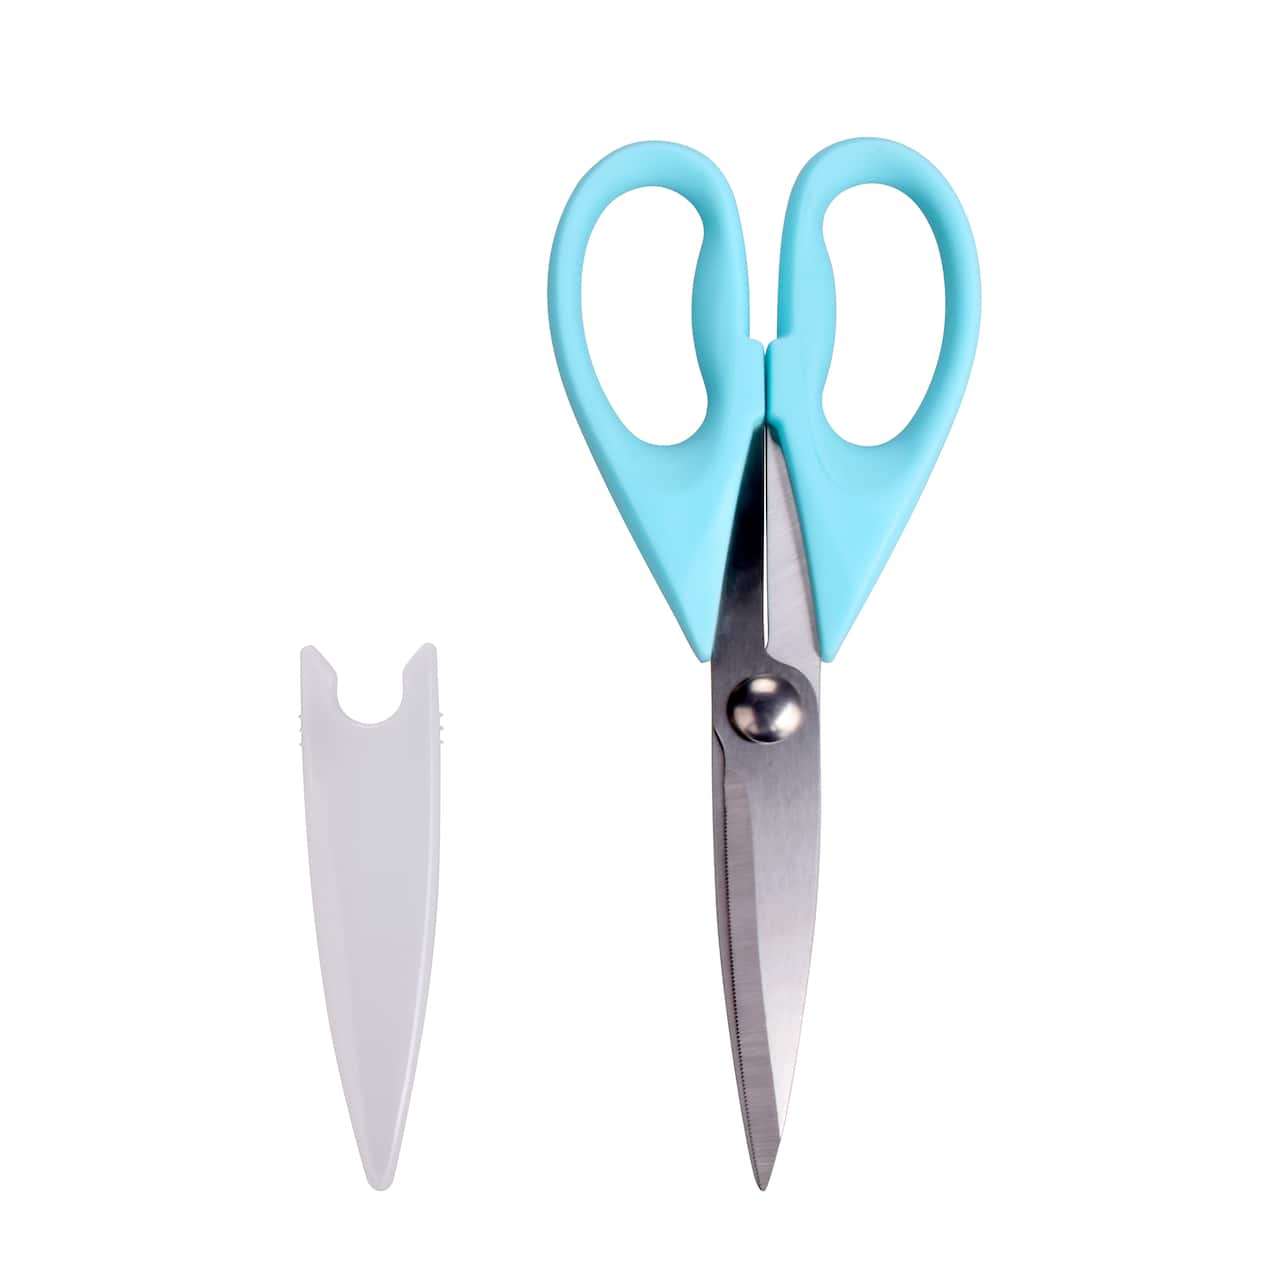 Soft Grip Stainless Steel Kitchen Shears by Celebrate It®